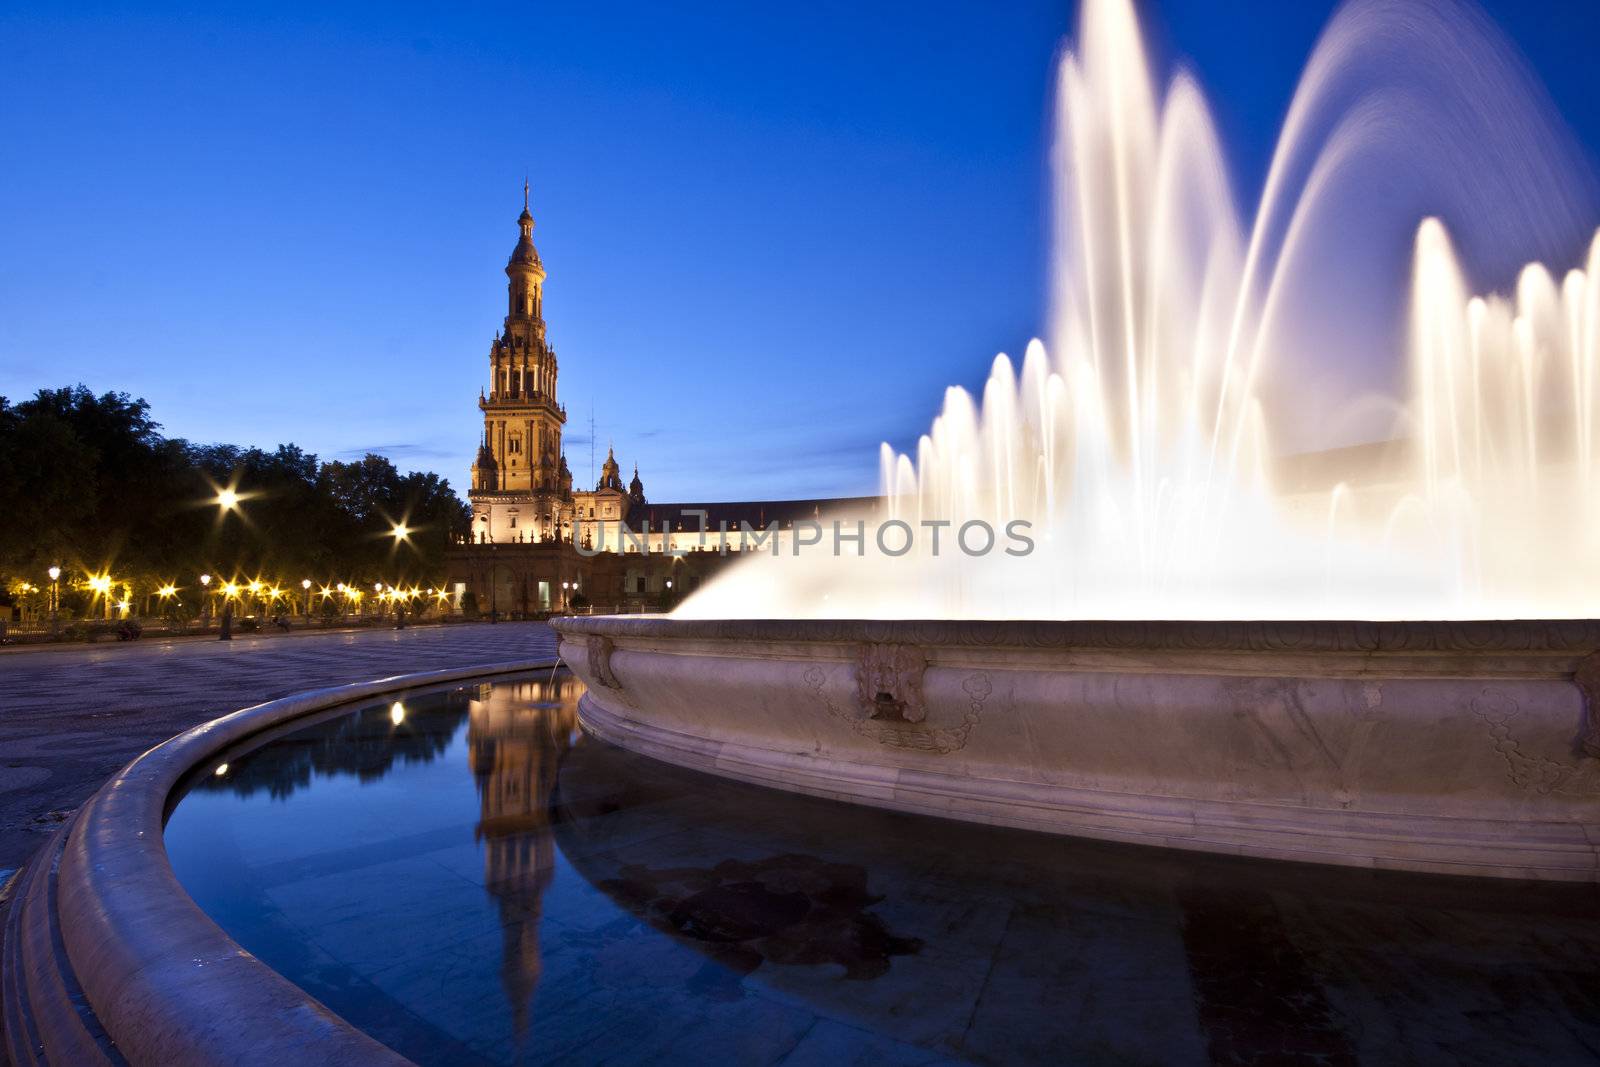 A view of the Plaza de Espana in Seville at dusk, Spain